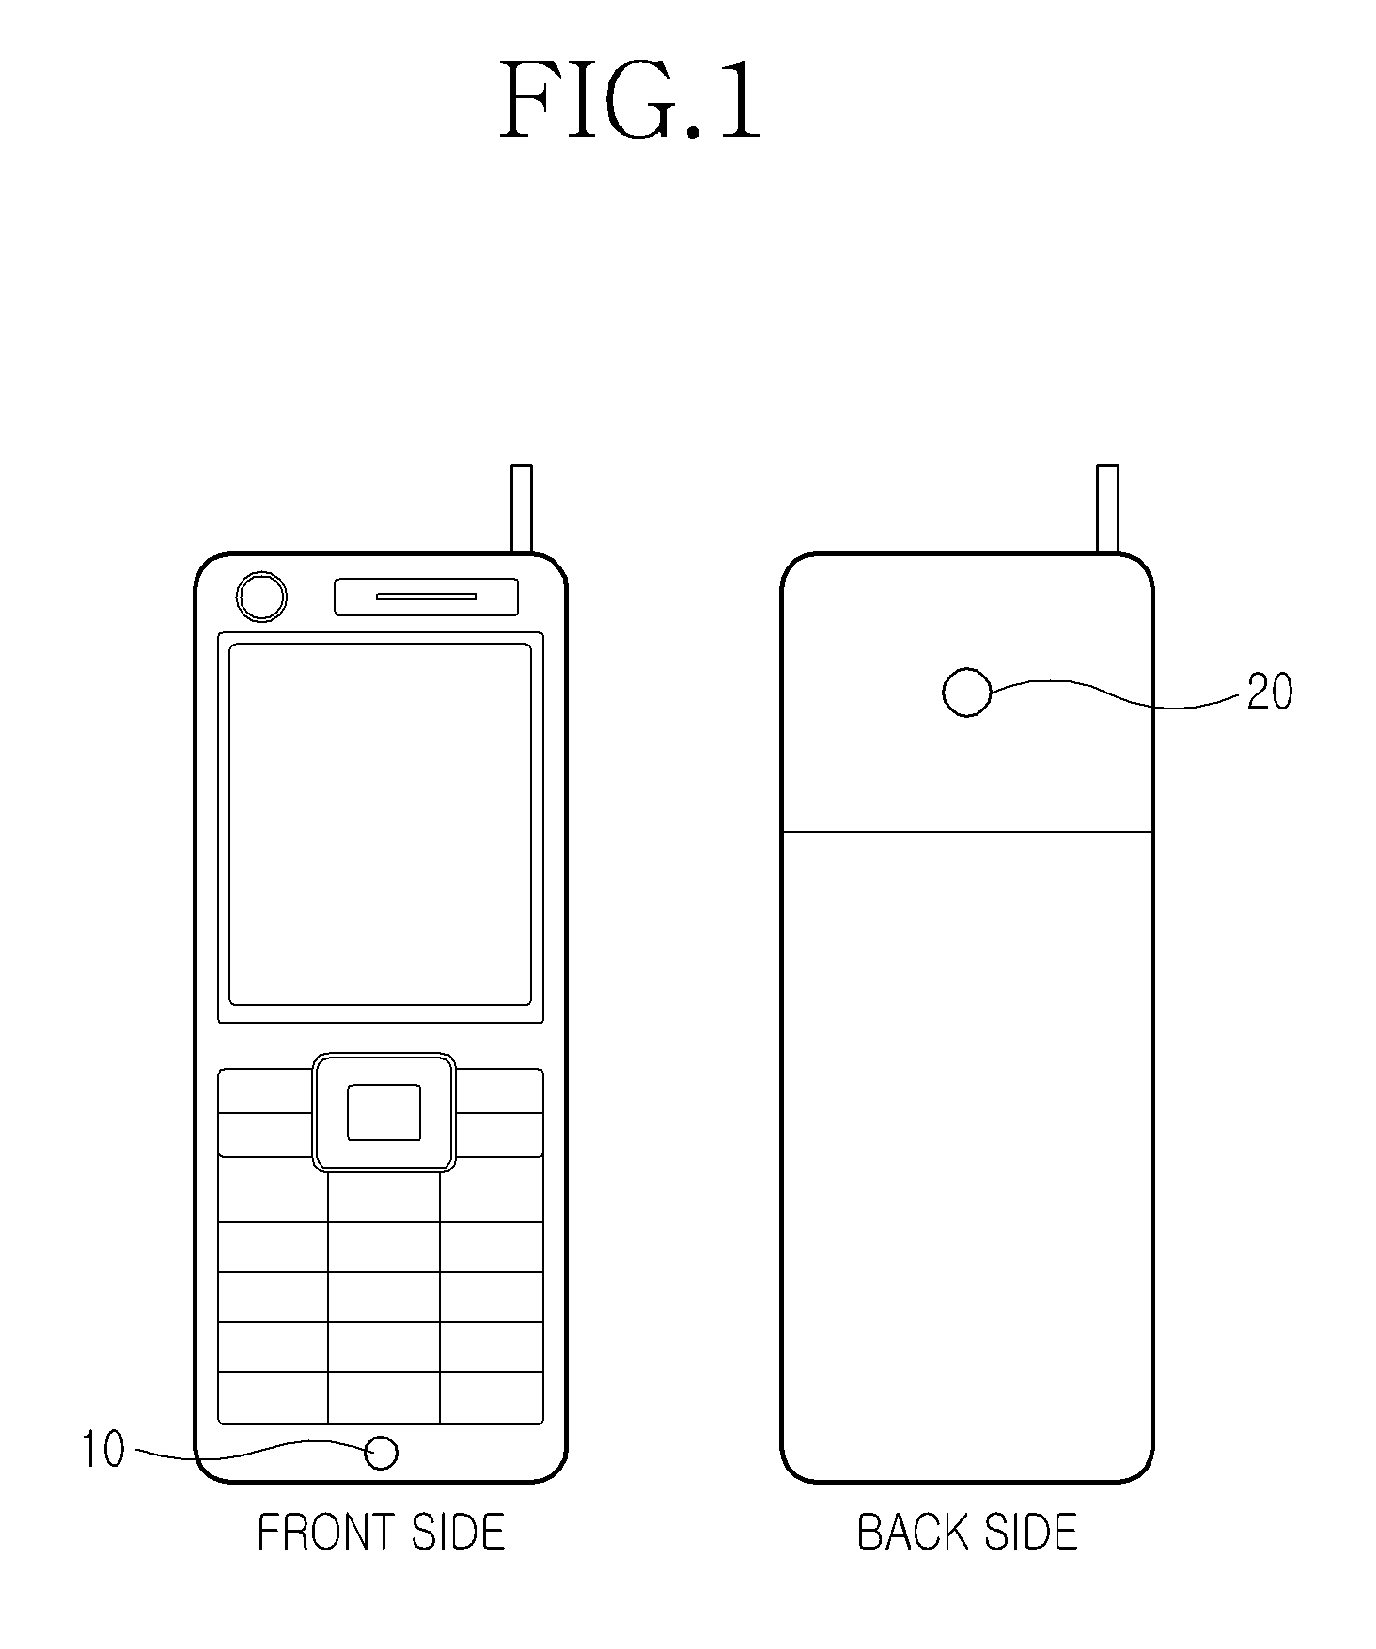 Apparatus and method for removing noise